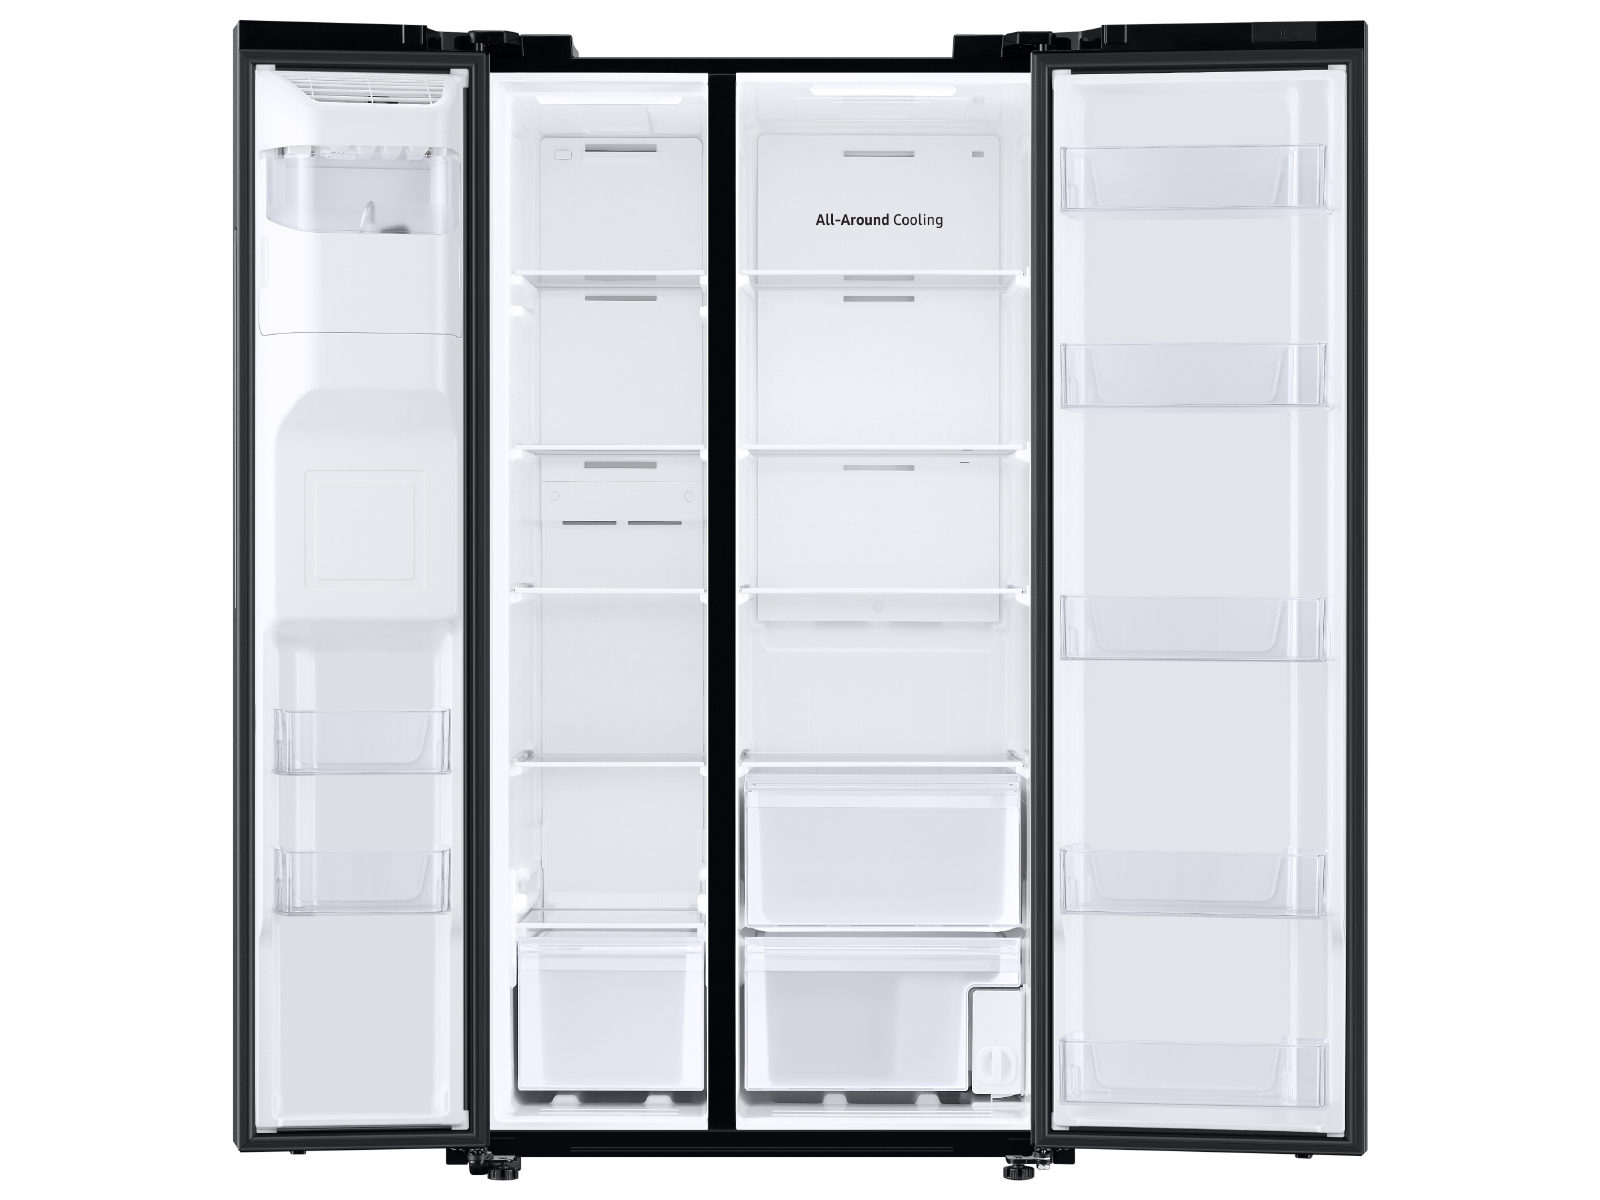 Thumbnail image of 27.4 cu. ft. Large Capacity Side-by-Side Refrigerator in Black Stainless Steel